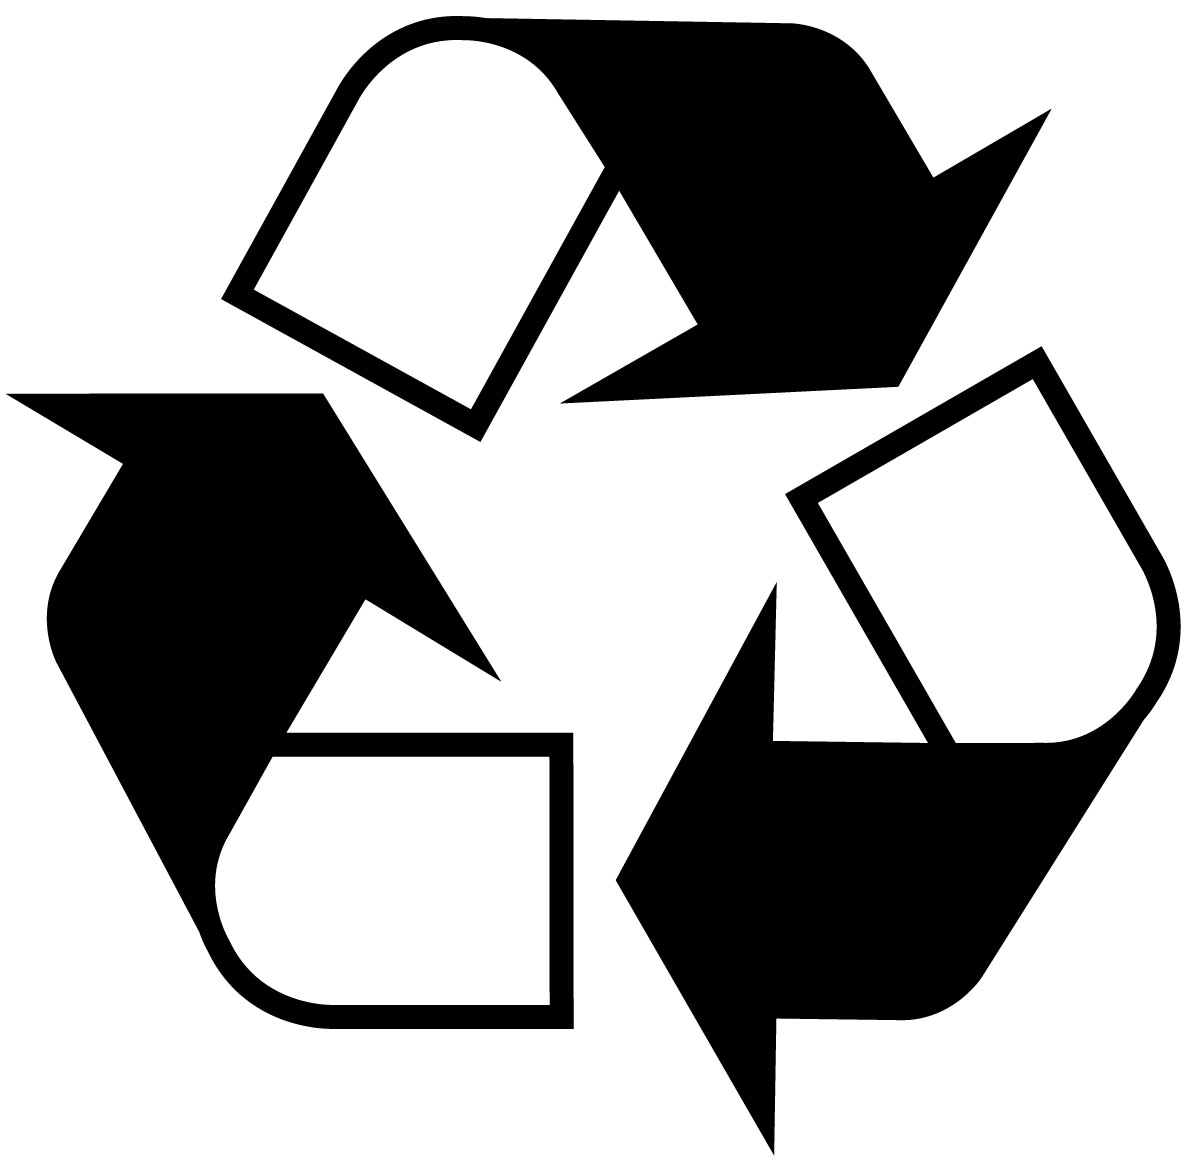 White Recycle Logo - ClipArt Best